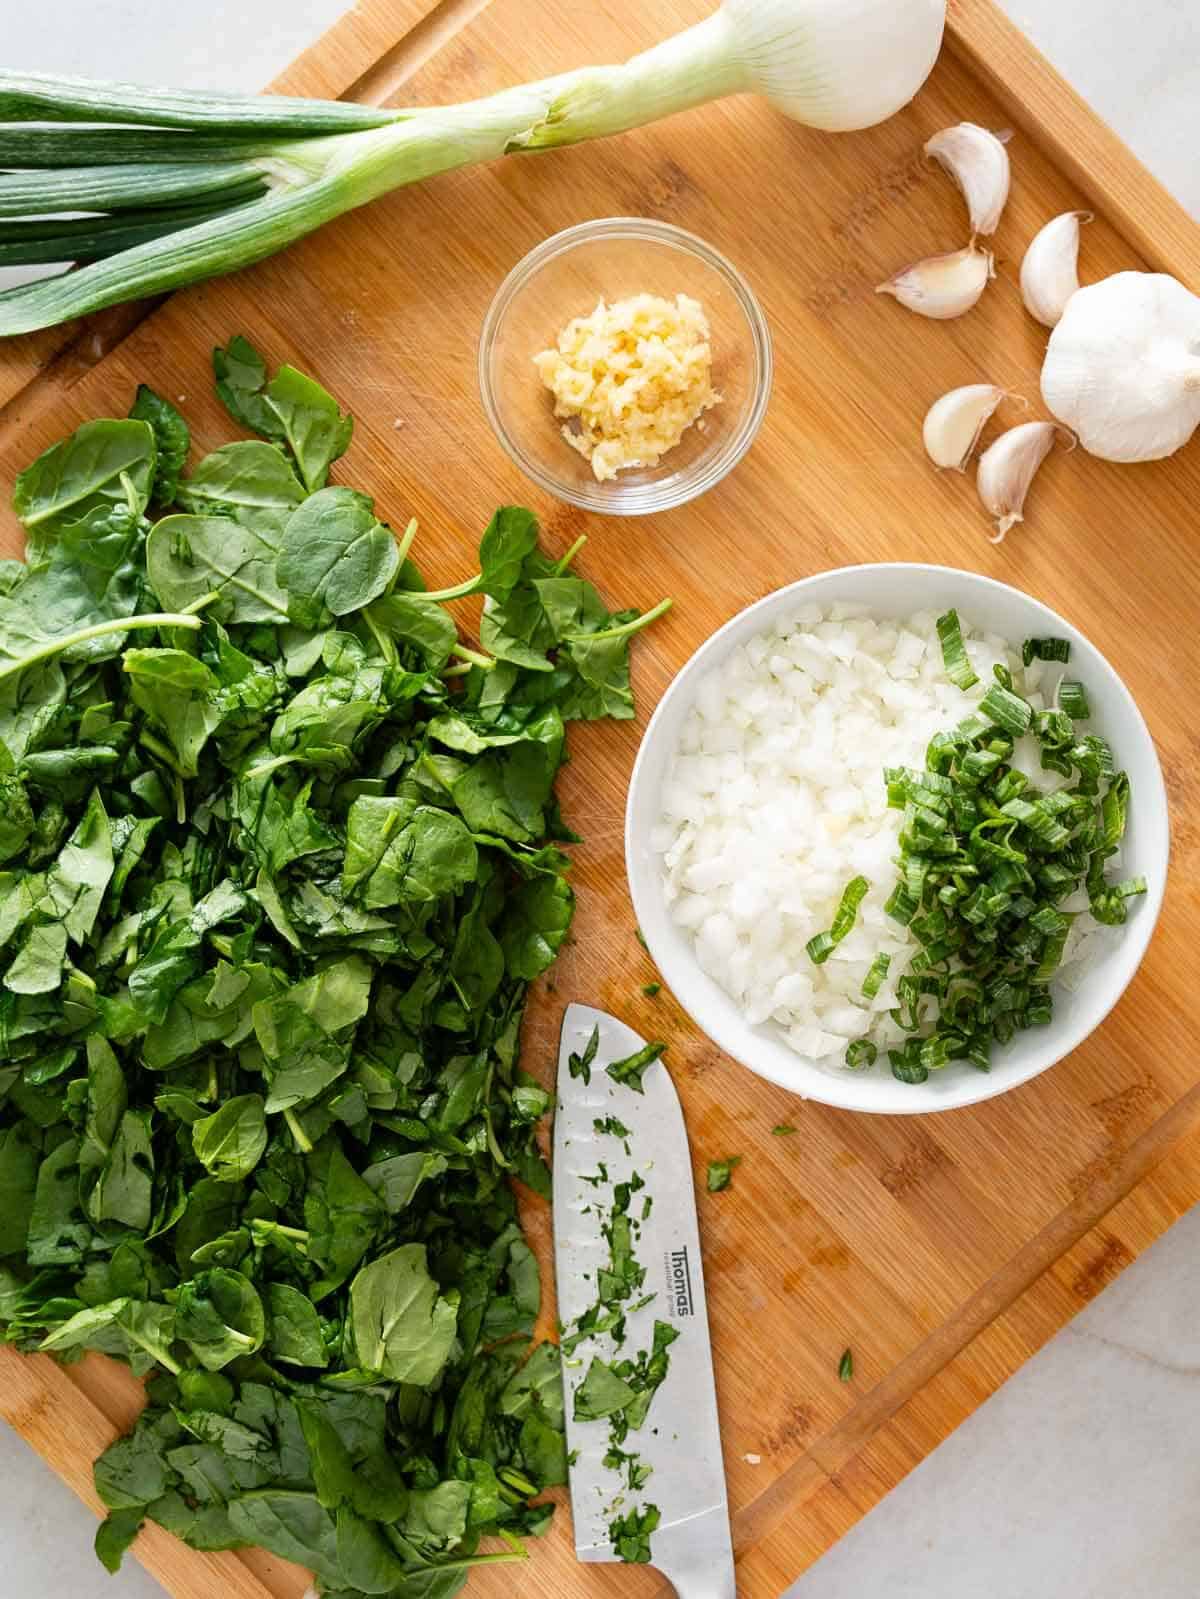 chop the onions, garlic, and spinach.